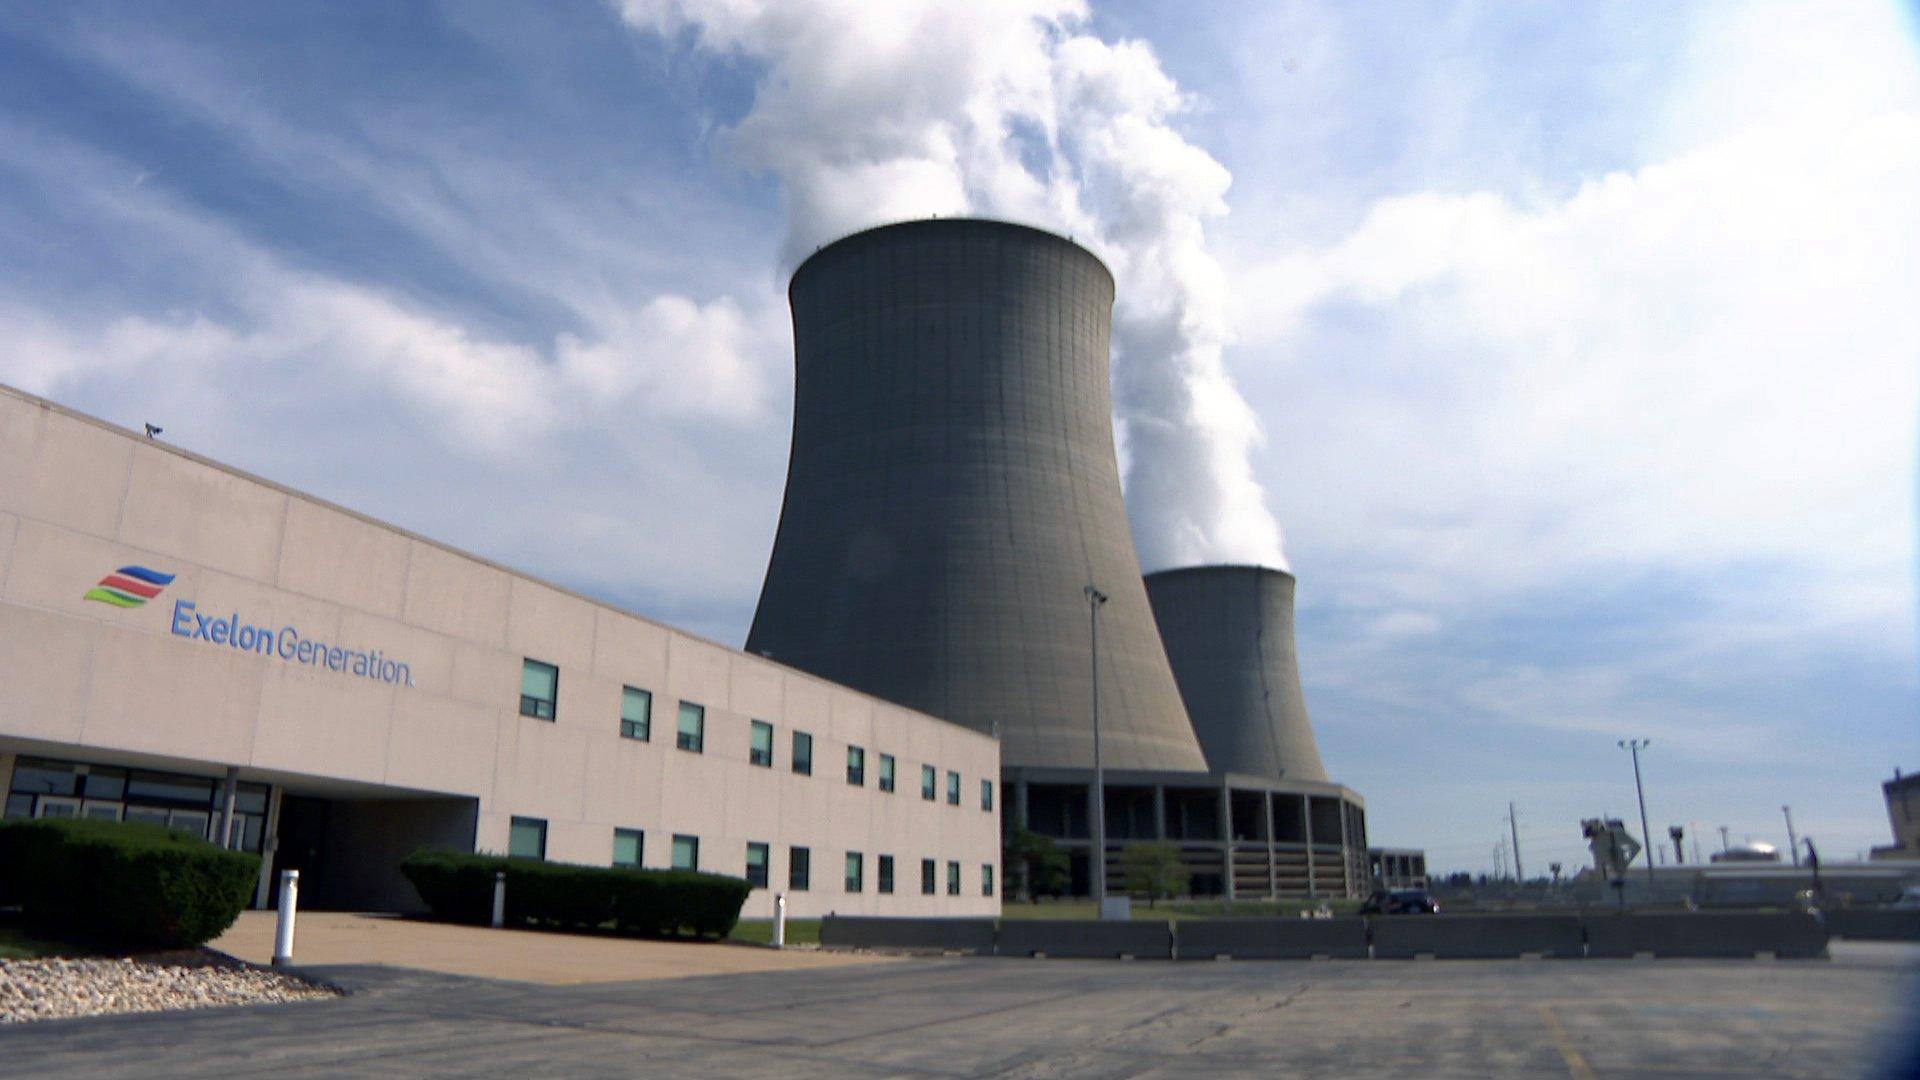 Exelon has been steadfast that it will begin to shut down its nuclear plant in Byron unless a law is passed by Monday’s end, a law that would have ratepayers pay an extra charge on electric bills to keep Exelon nuclear plants running. (WTTW News)